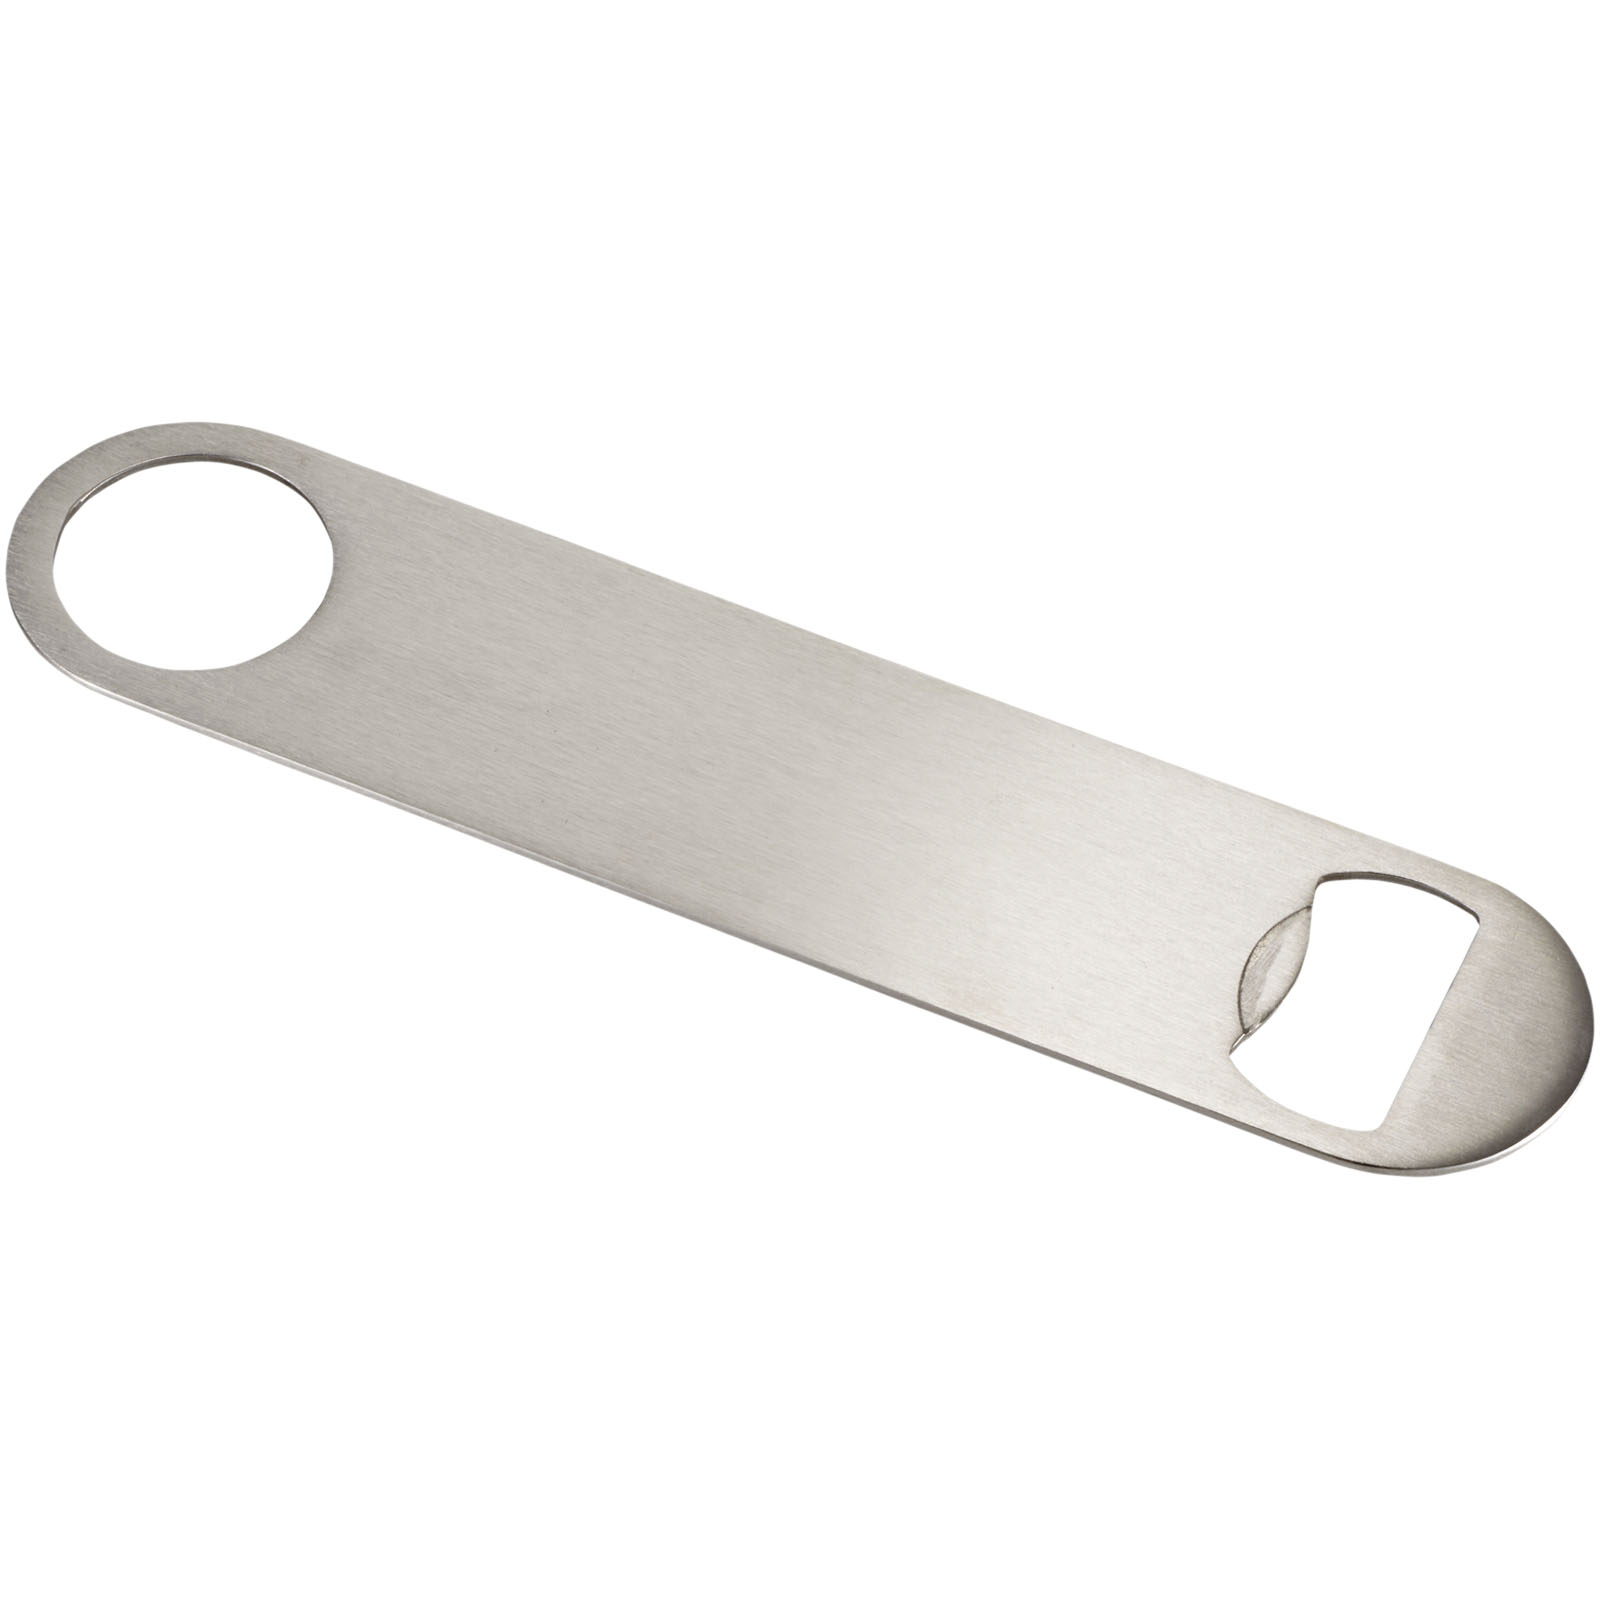 Bottle Openers & Accessories - Paddle bottle opener